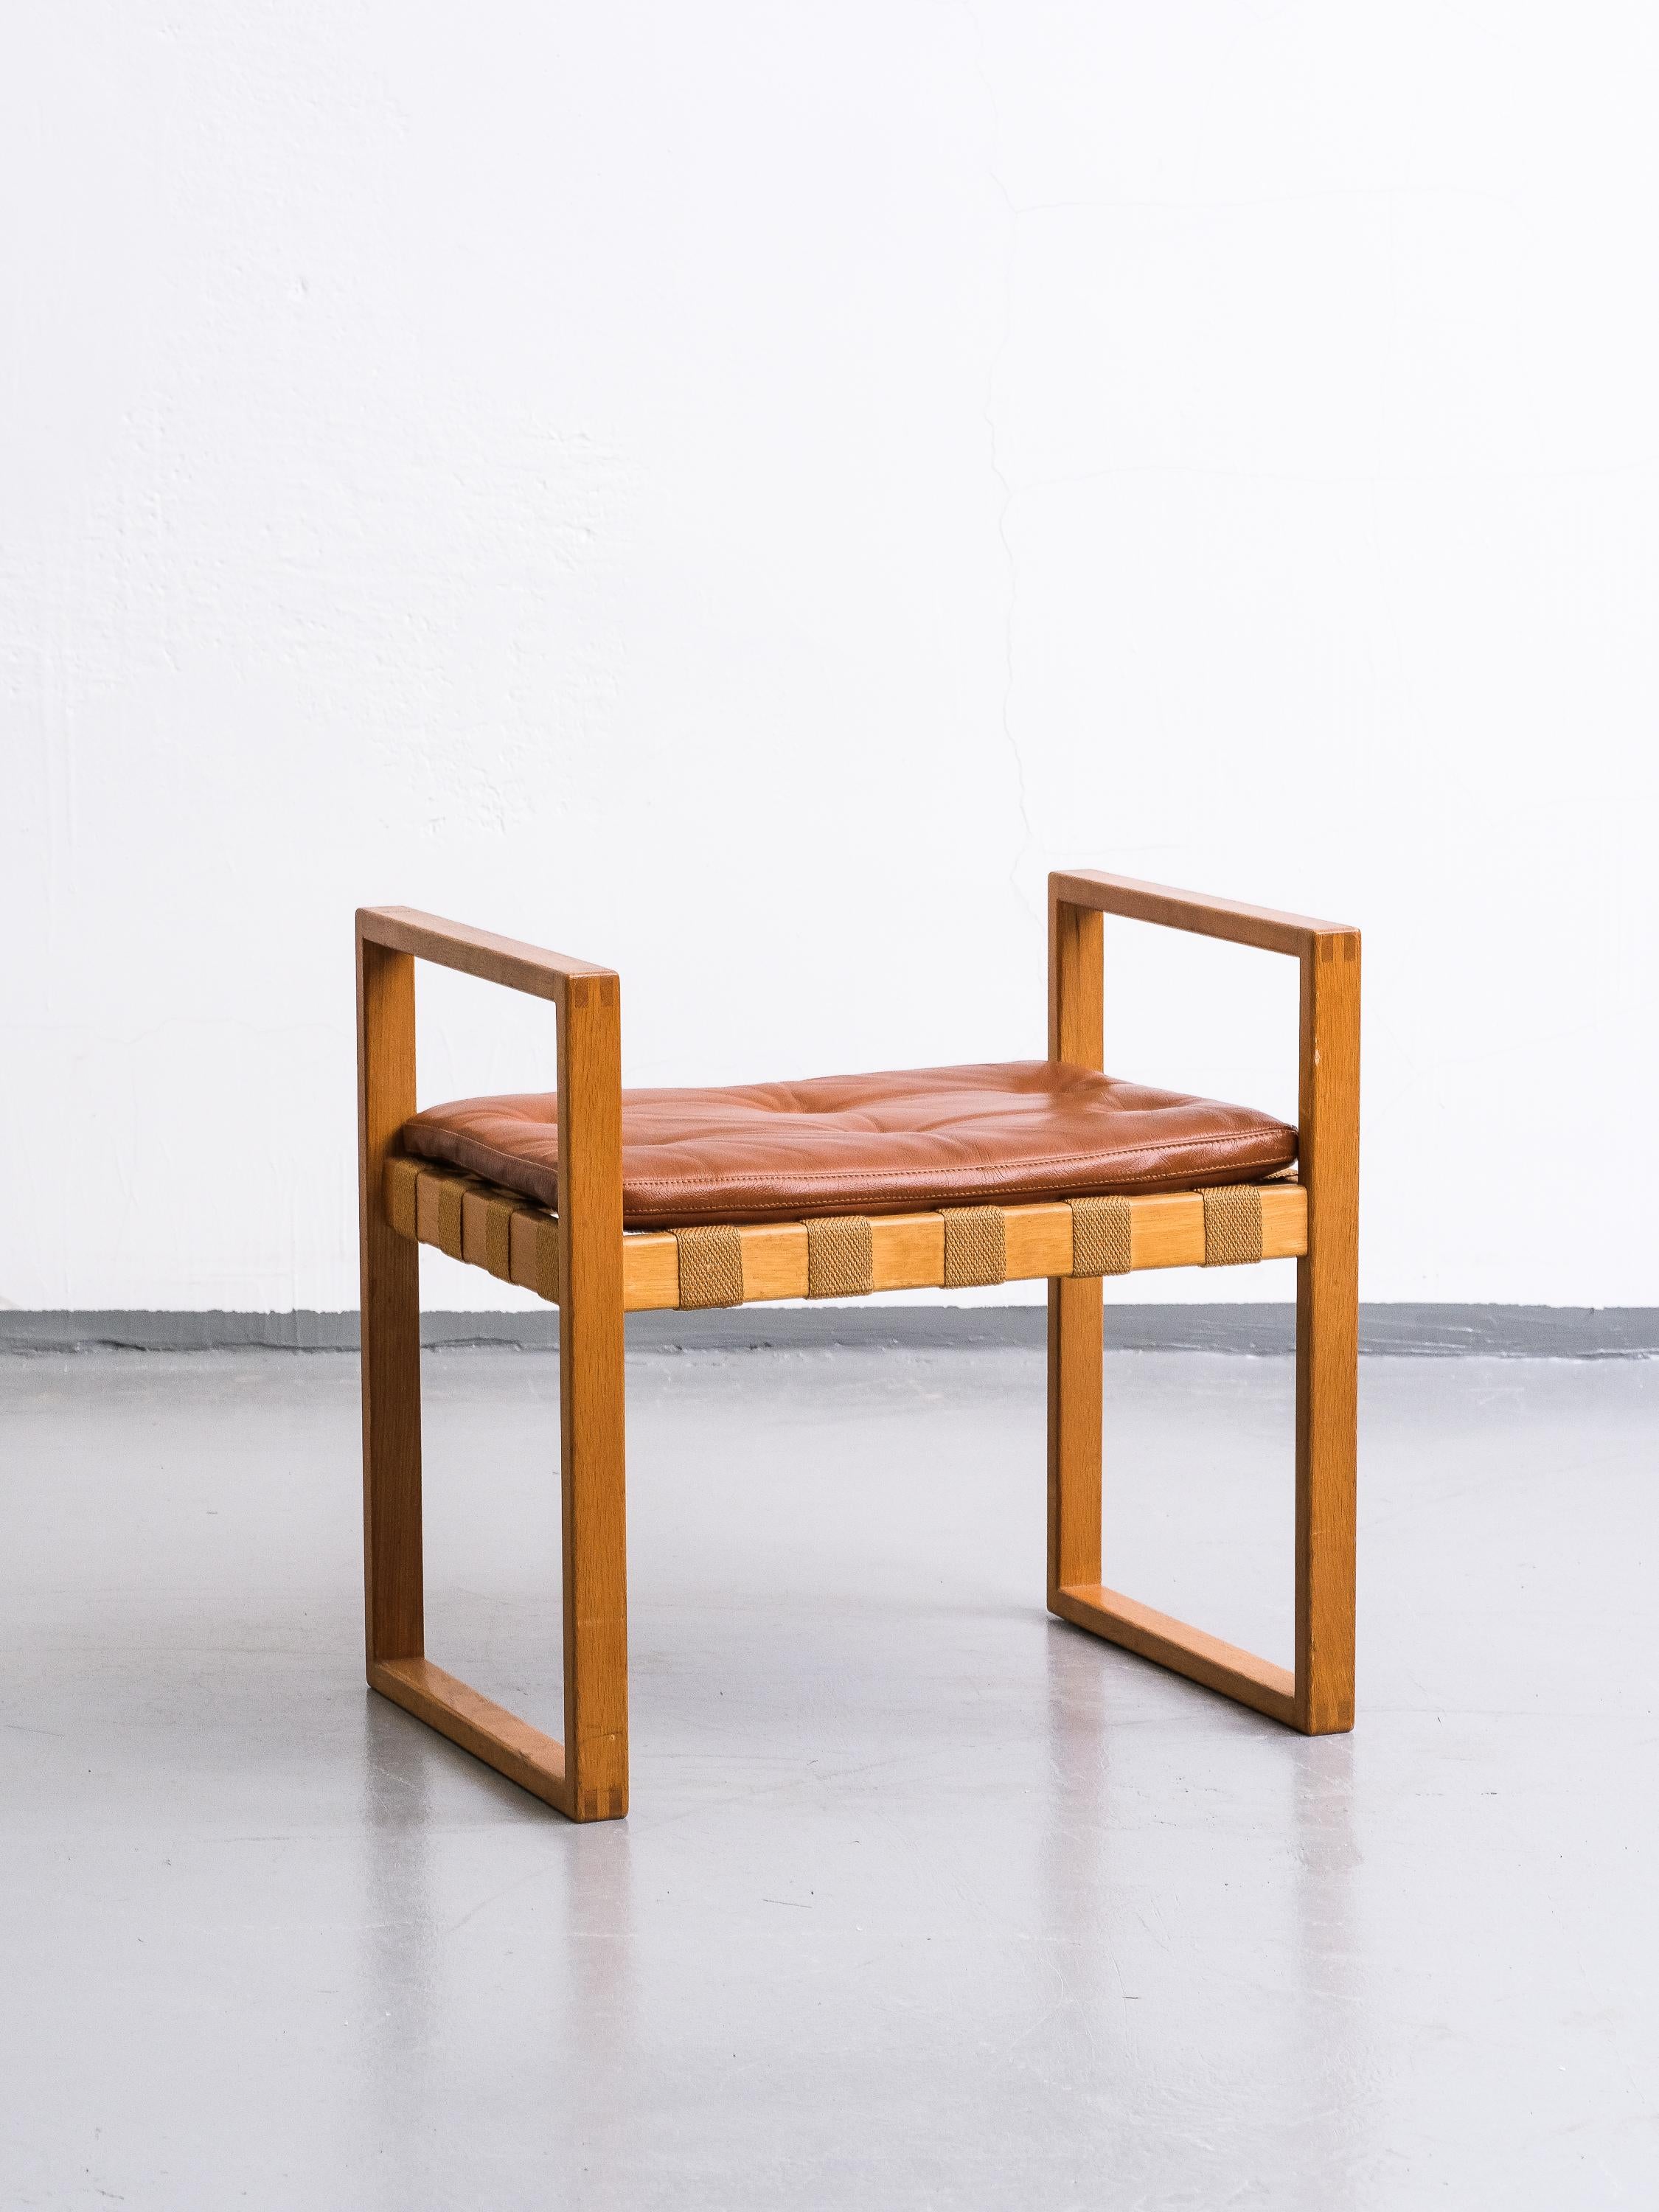 This stool was designed by Swedish designer Åke Fribyter and made in solid oak at Nybrofabriken, Fröseke. The details in the woodwork are in high quality. Seat cushion is new, made of cognac leather.